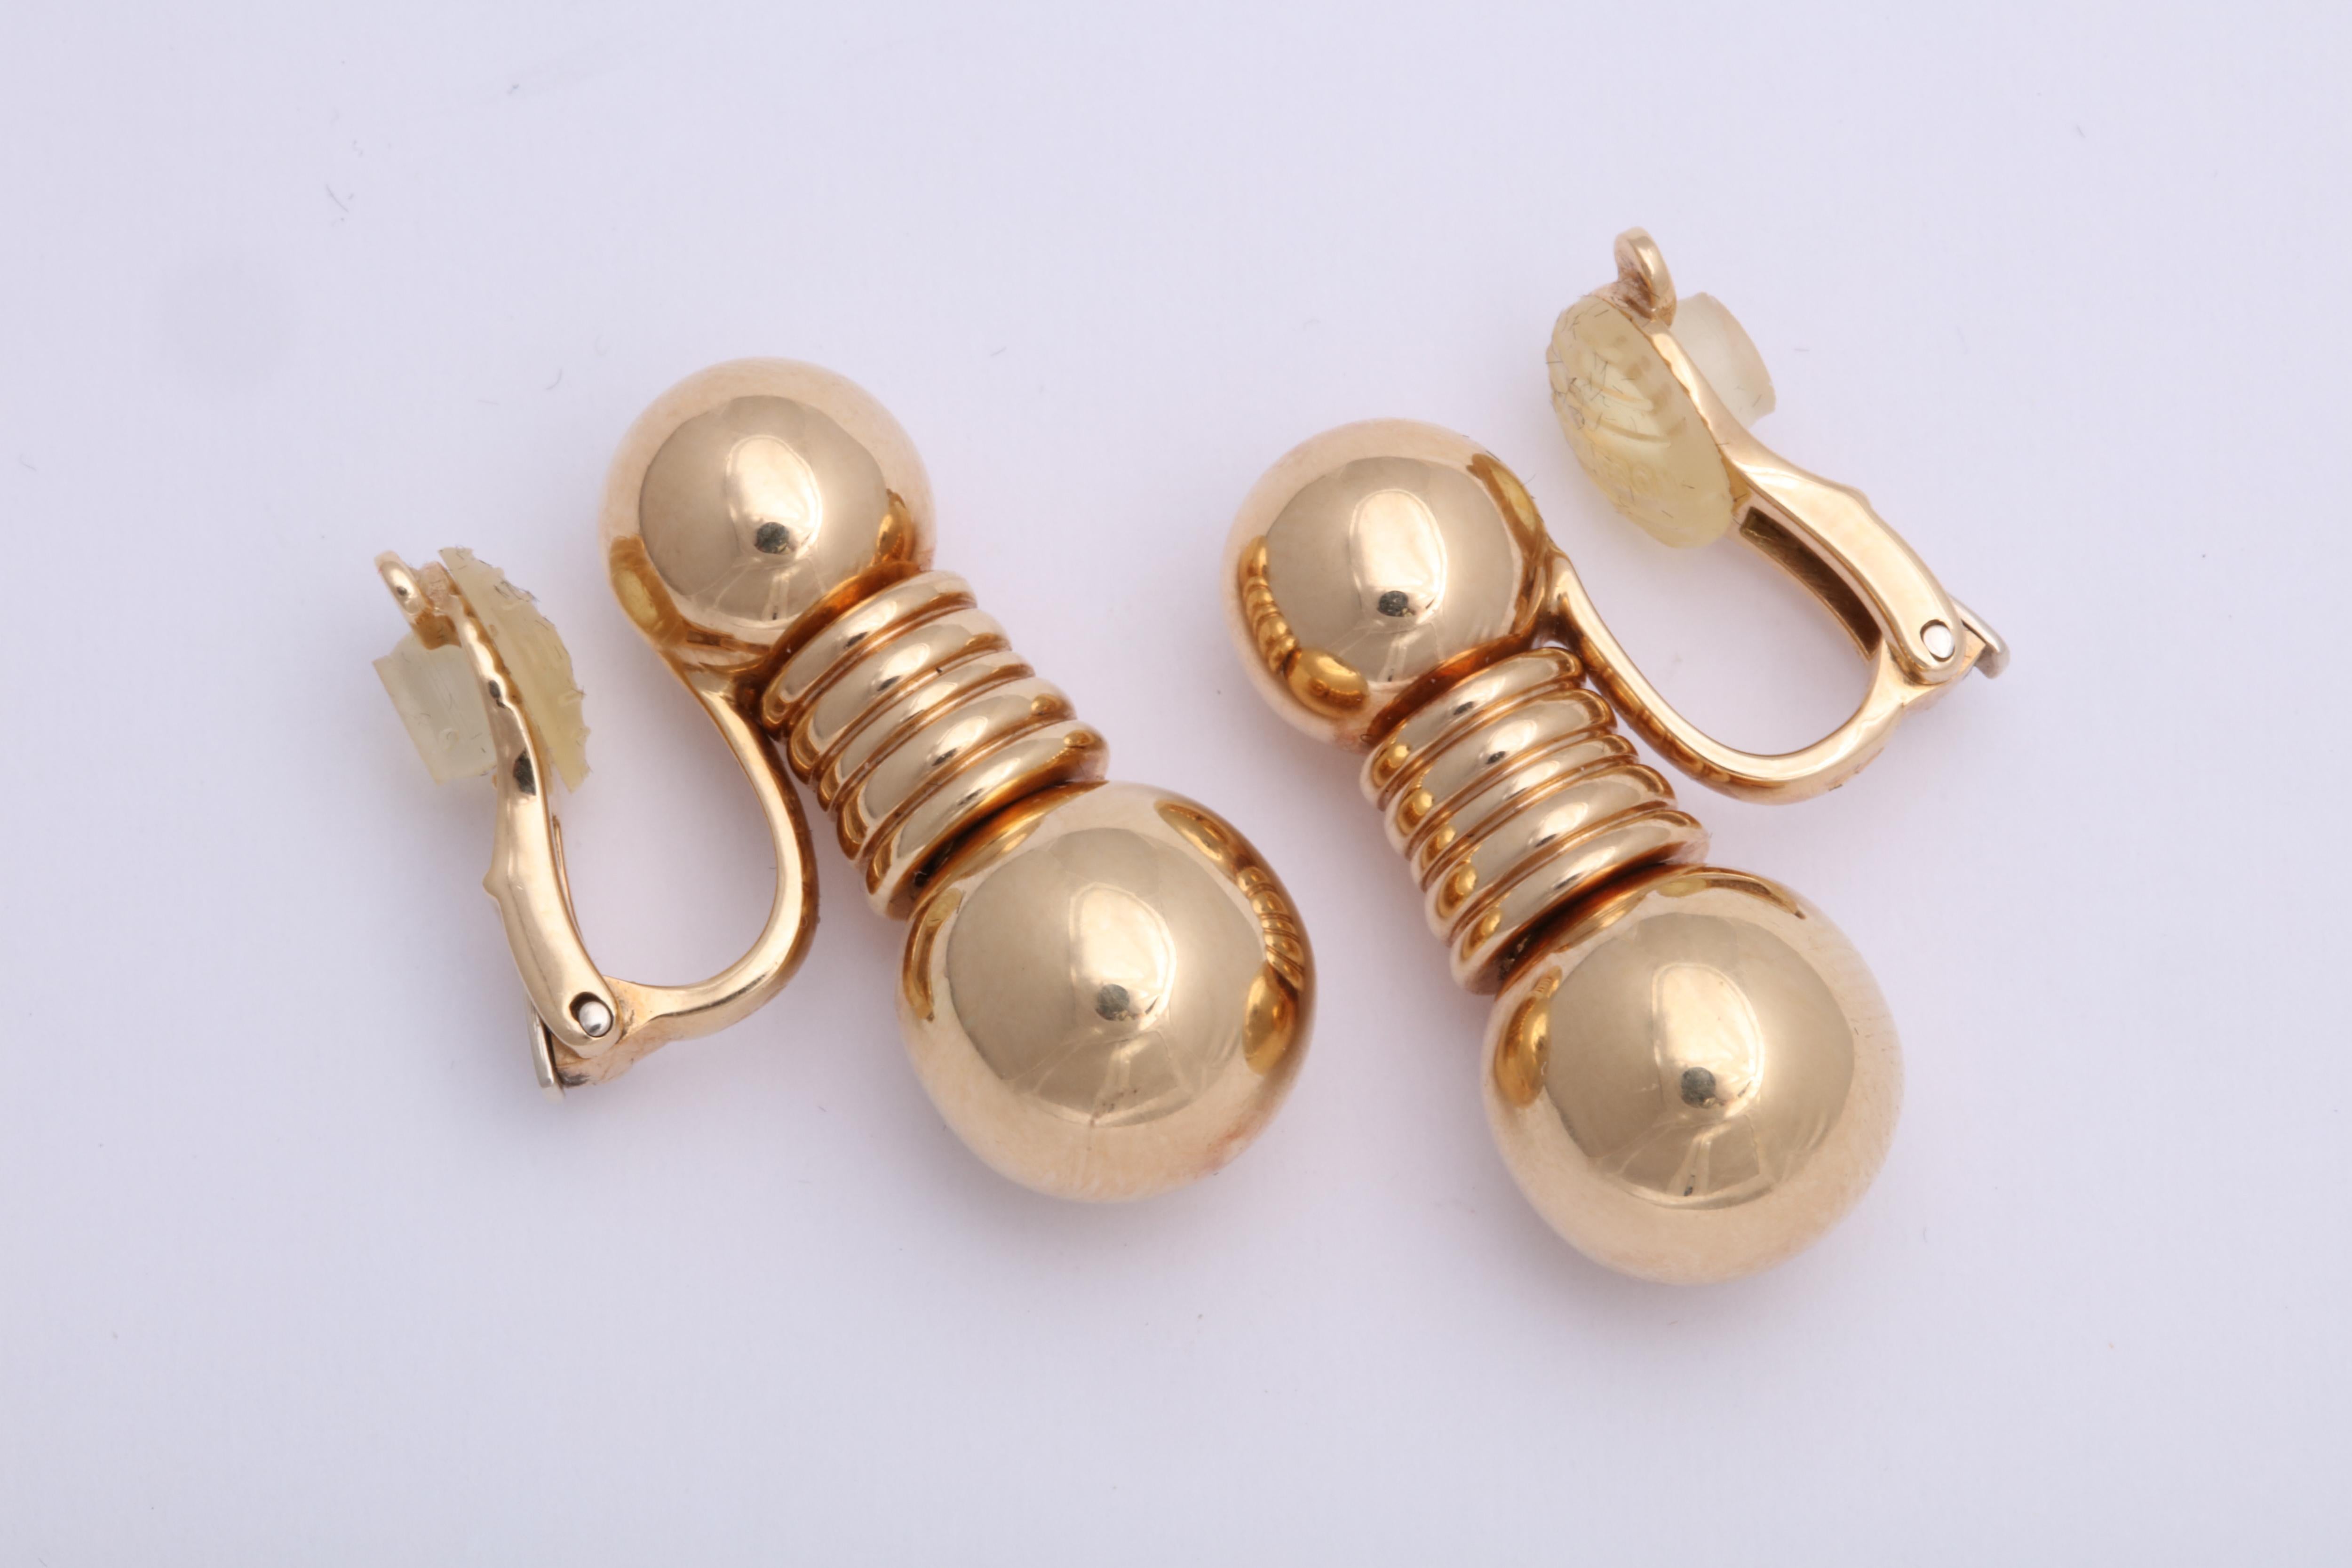 Stylized 18kt Rose gold Clip on Double Ball Earrings.  Signed Boucheron and numbered.  These earrings are fabulous and move slightly as you move.  Very Subtle.   Clip on but easily converted to pierced. 